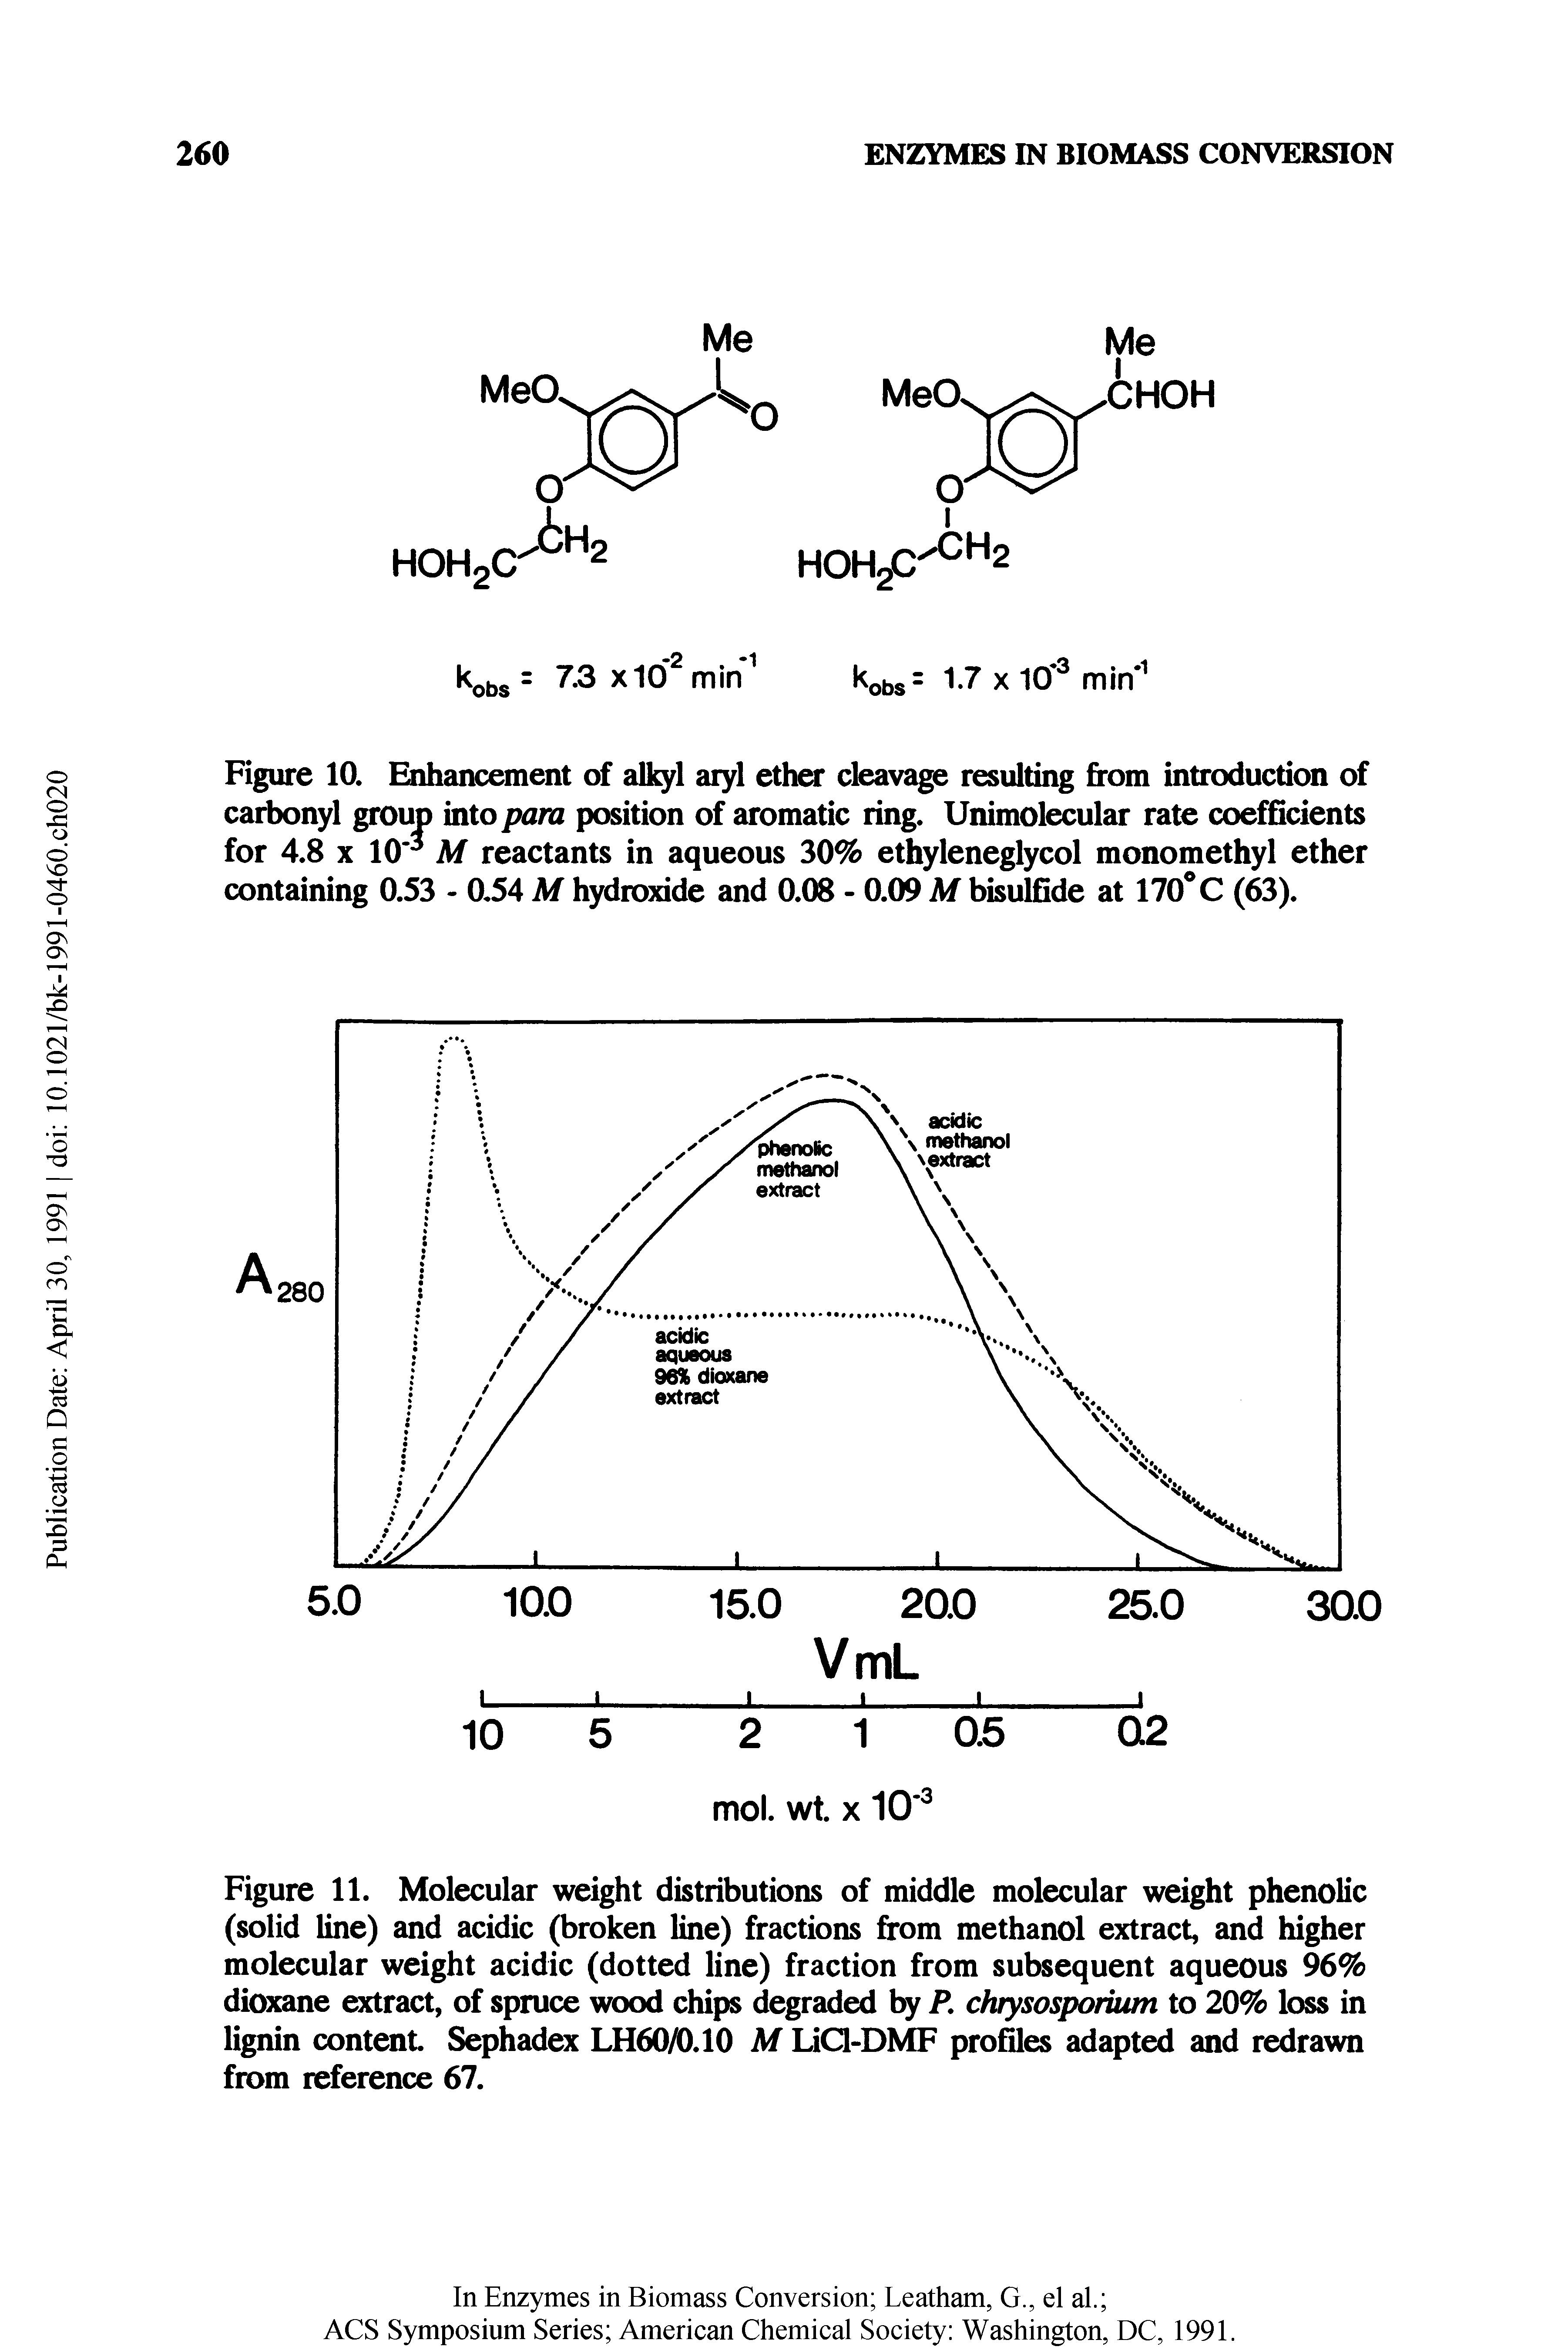 Figure 10. Enhancement of all l aryl ether cleavage resulting from introduction of carbonyl group into para position of aromatic ring. Unimolecular rate coefficients for 4.8 X 10 M reactants in aqueous 30% ethyleneglycol monomethyl ether containing 0.53 - 0.54 M hydroxide and 0.08 - 0.09 M bisulfide at 170 C (63).